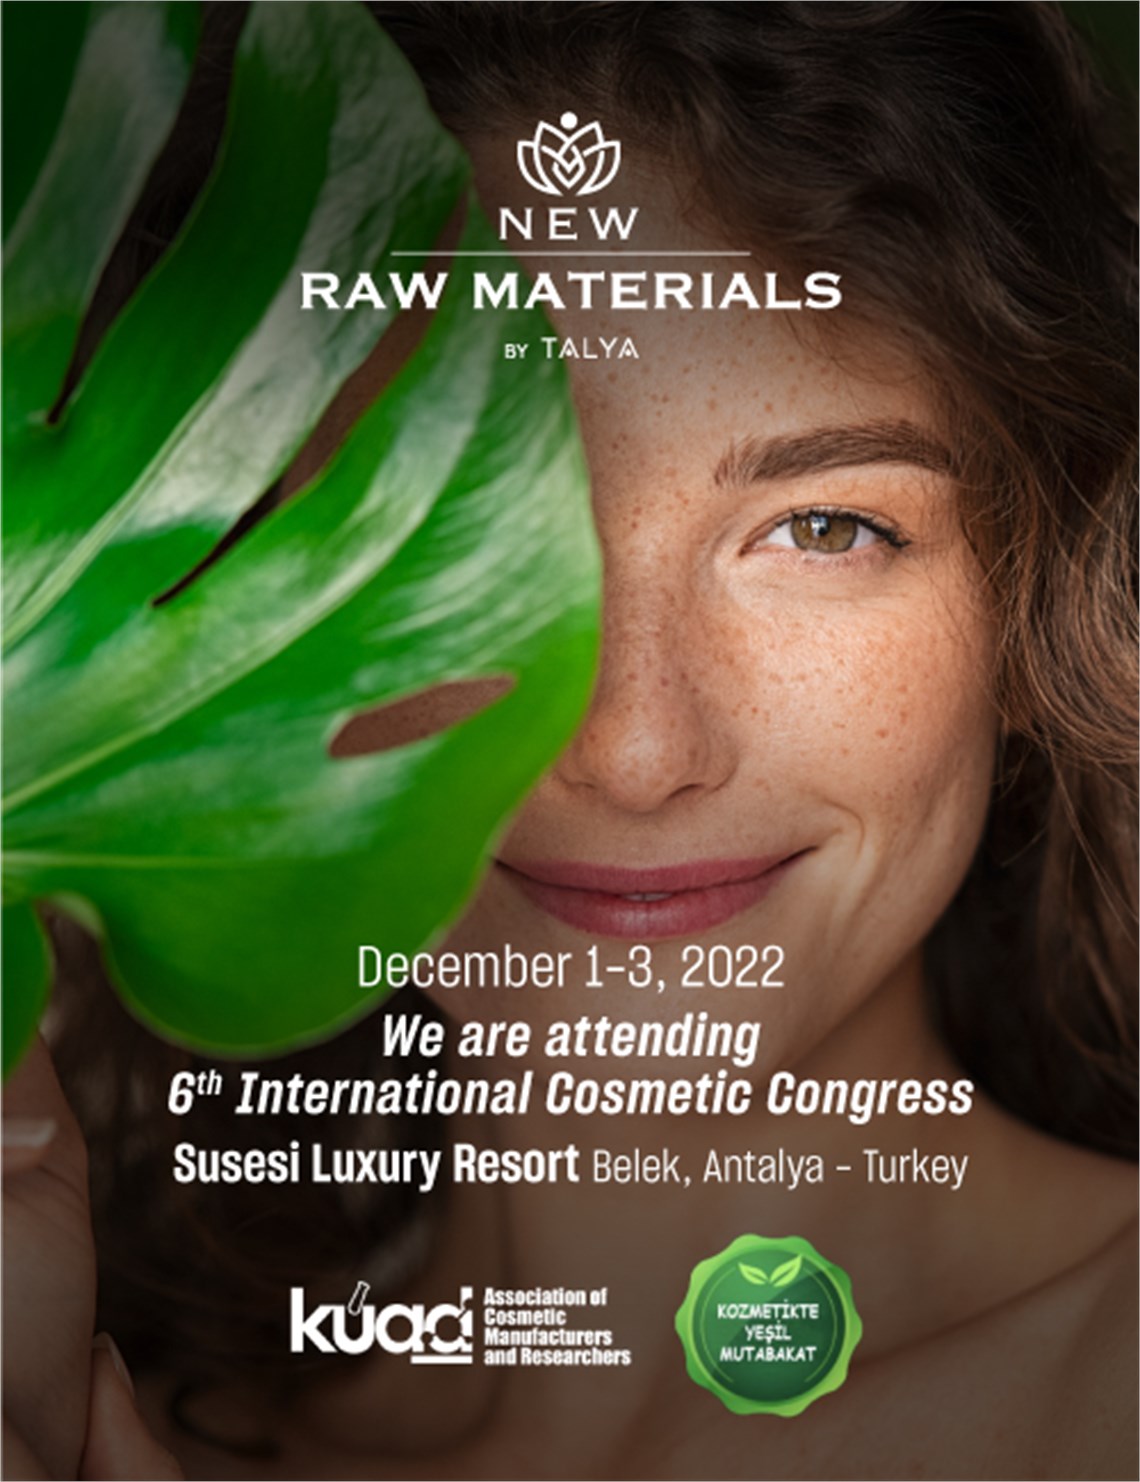 New Raw Materials is attending the 6th International Cosmetics Congress.